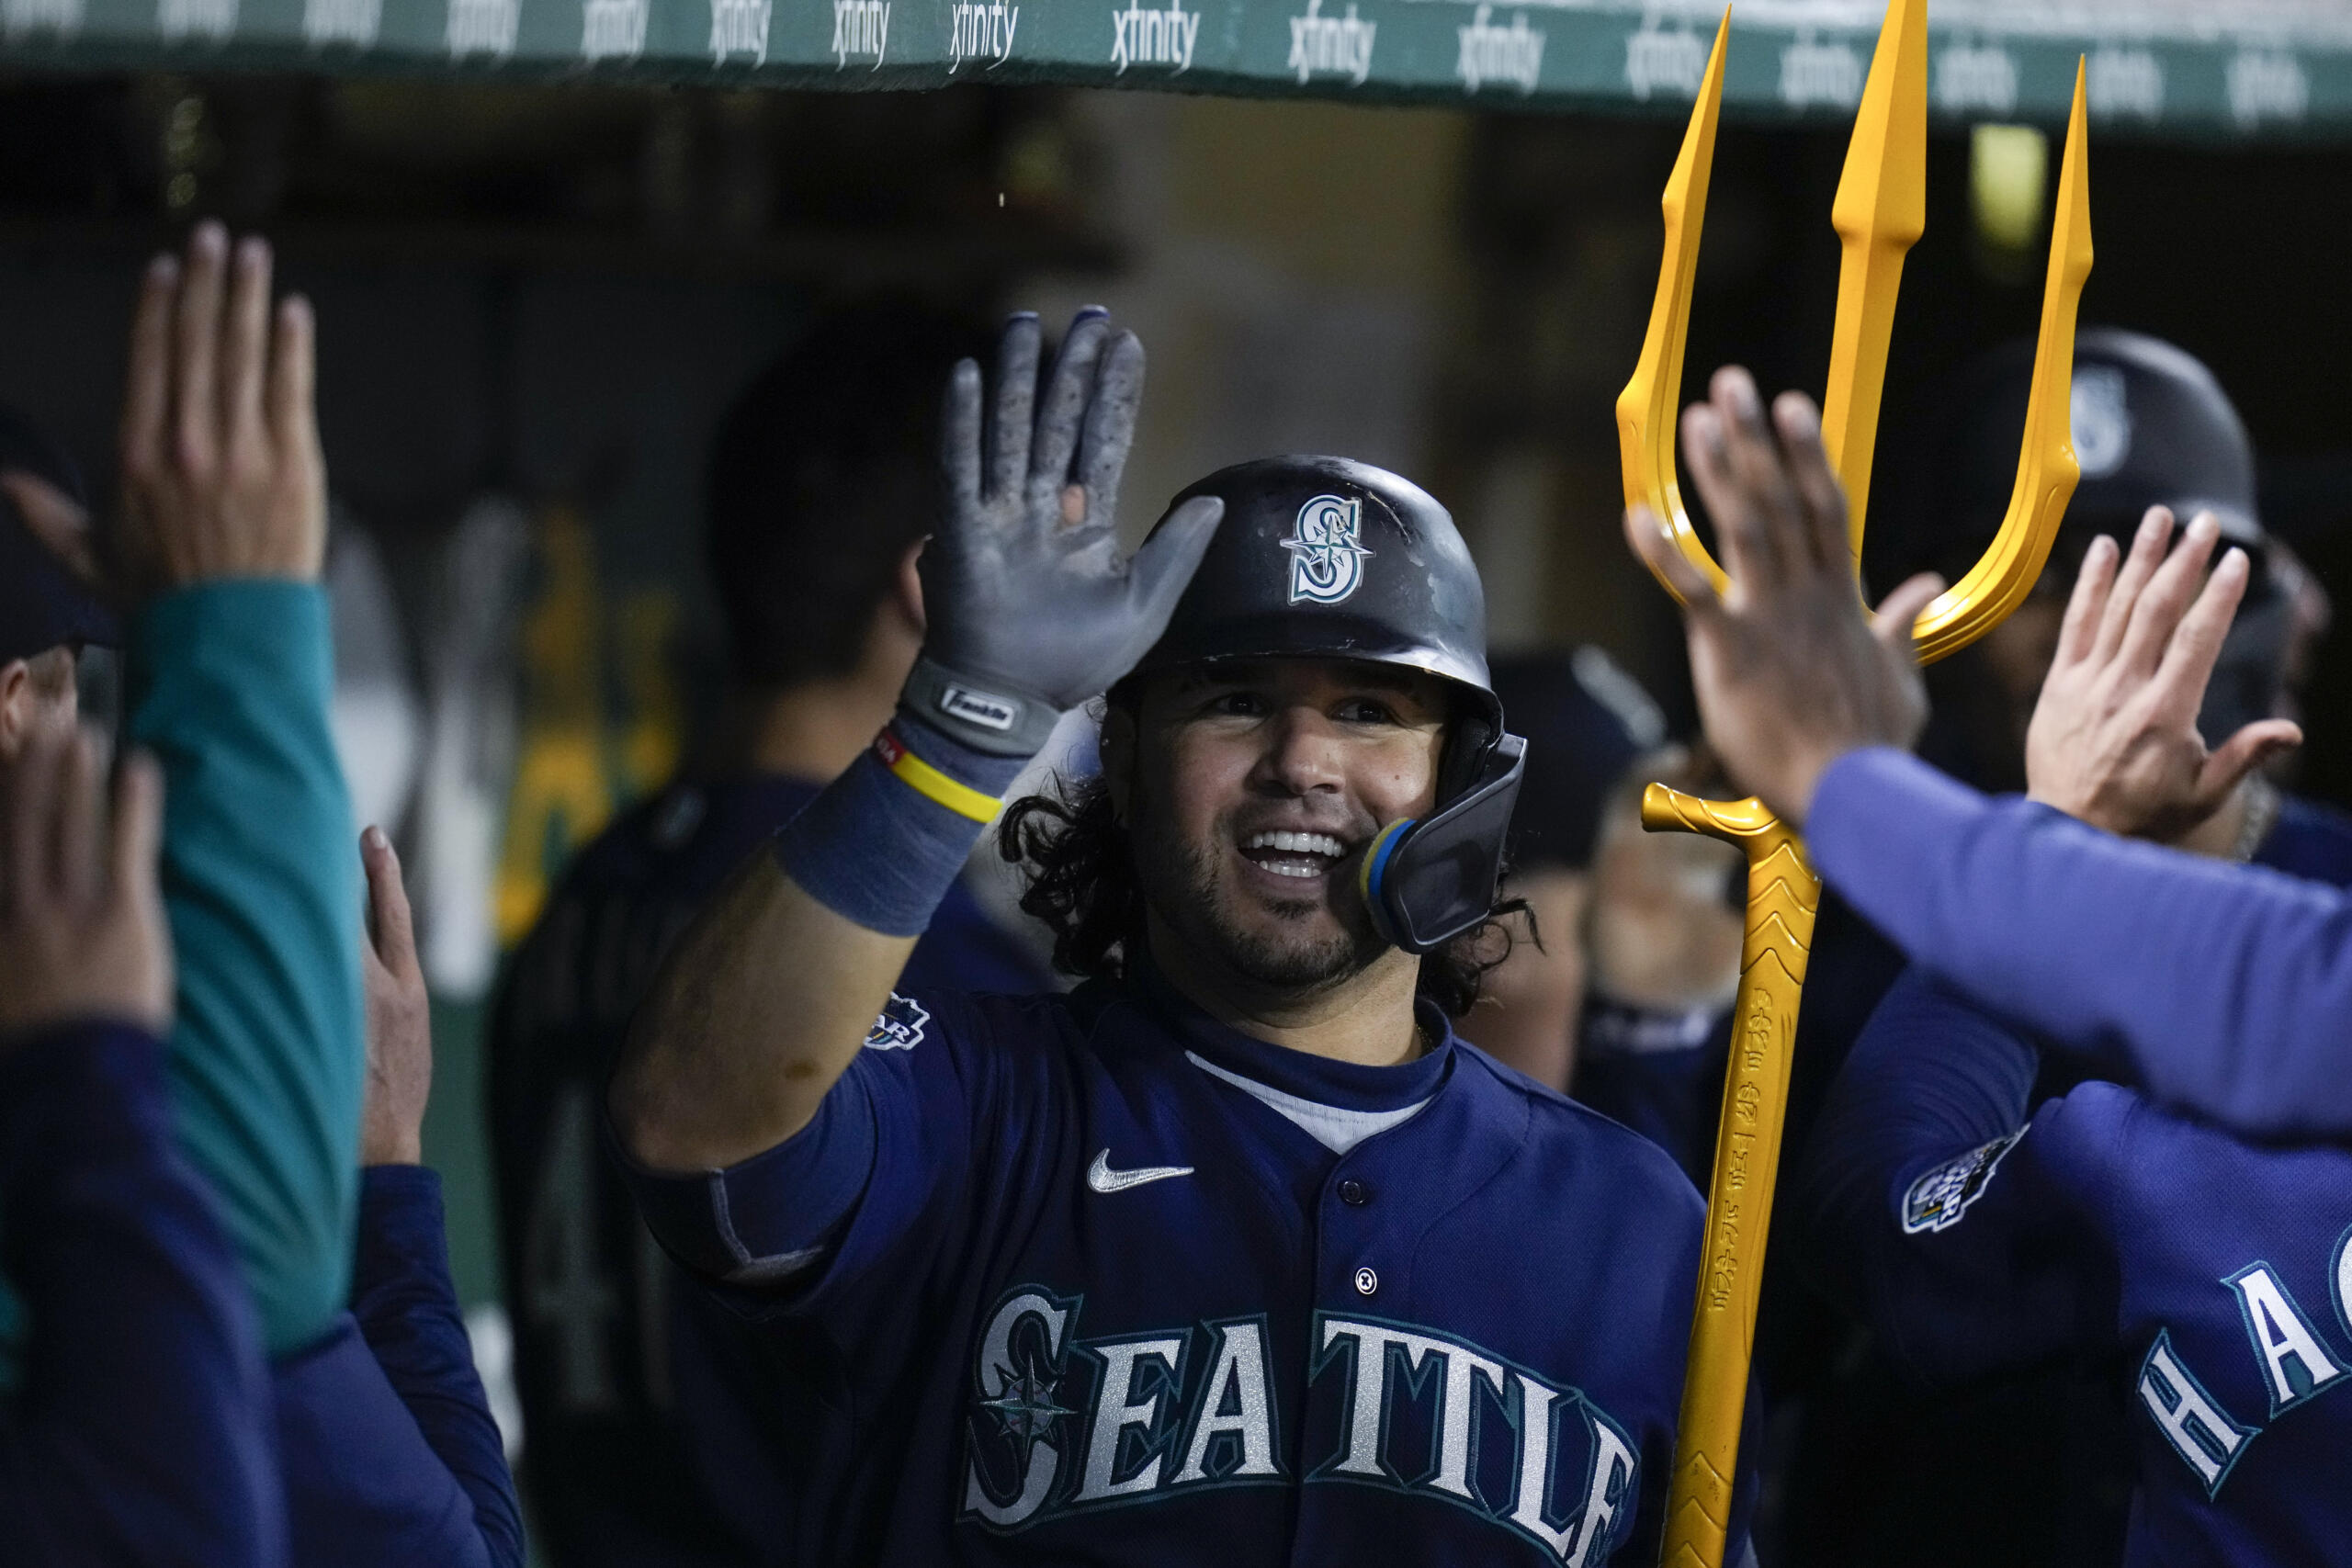 Pollock, Suárez homer late, Mariners beat A's 7-2 in 10 - The Columbian